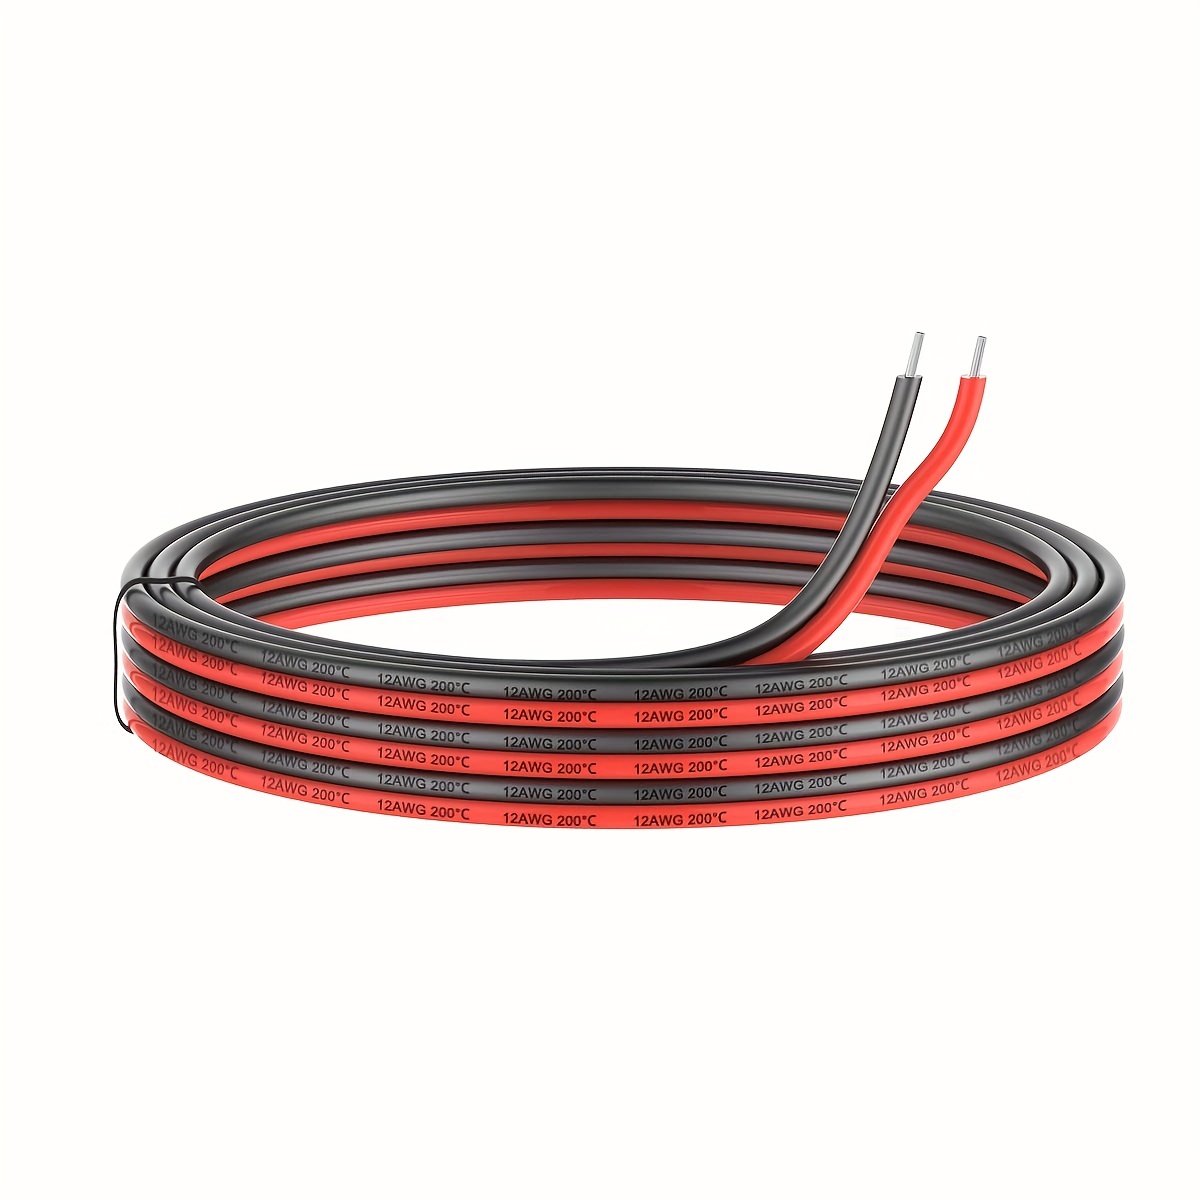 12AWG Silicone Electrical Wire 2 Core Wire 20ft [Black 10ft Red 10ft] 12 Gauge Soft and Flexible Hook Up Oxygen Free Strands Tinned Copper Wire